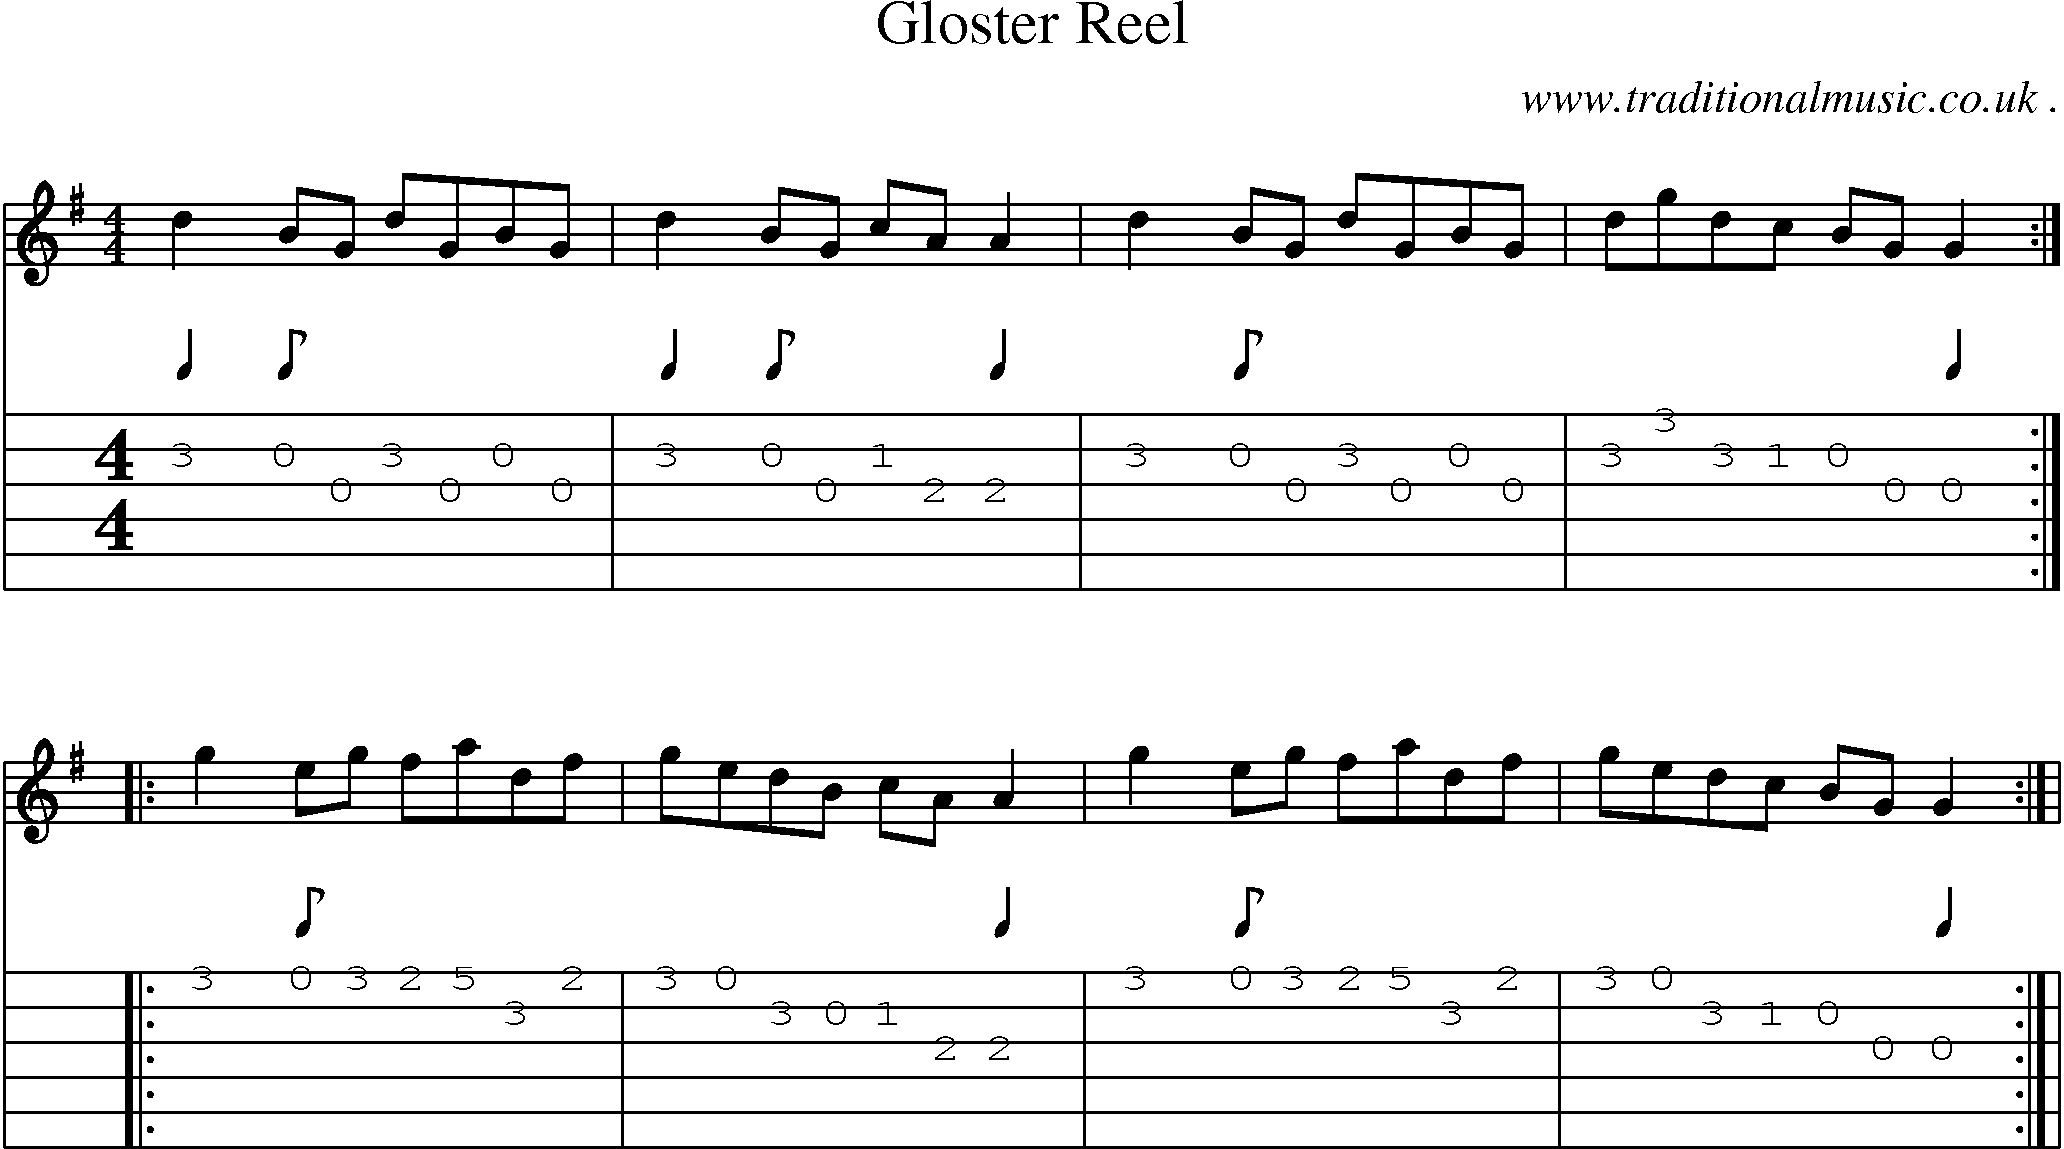 Sheet-Music and Guitar Tabs for Gloster Reel